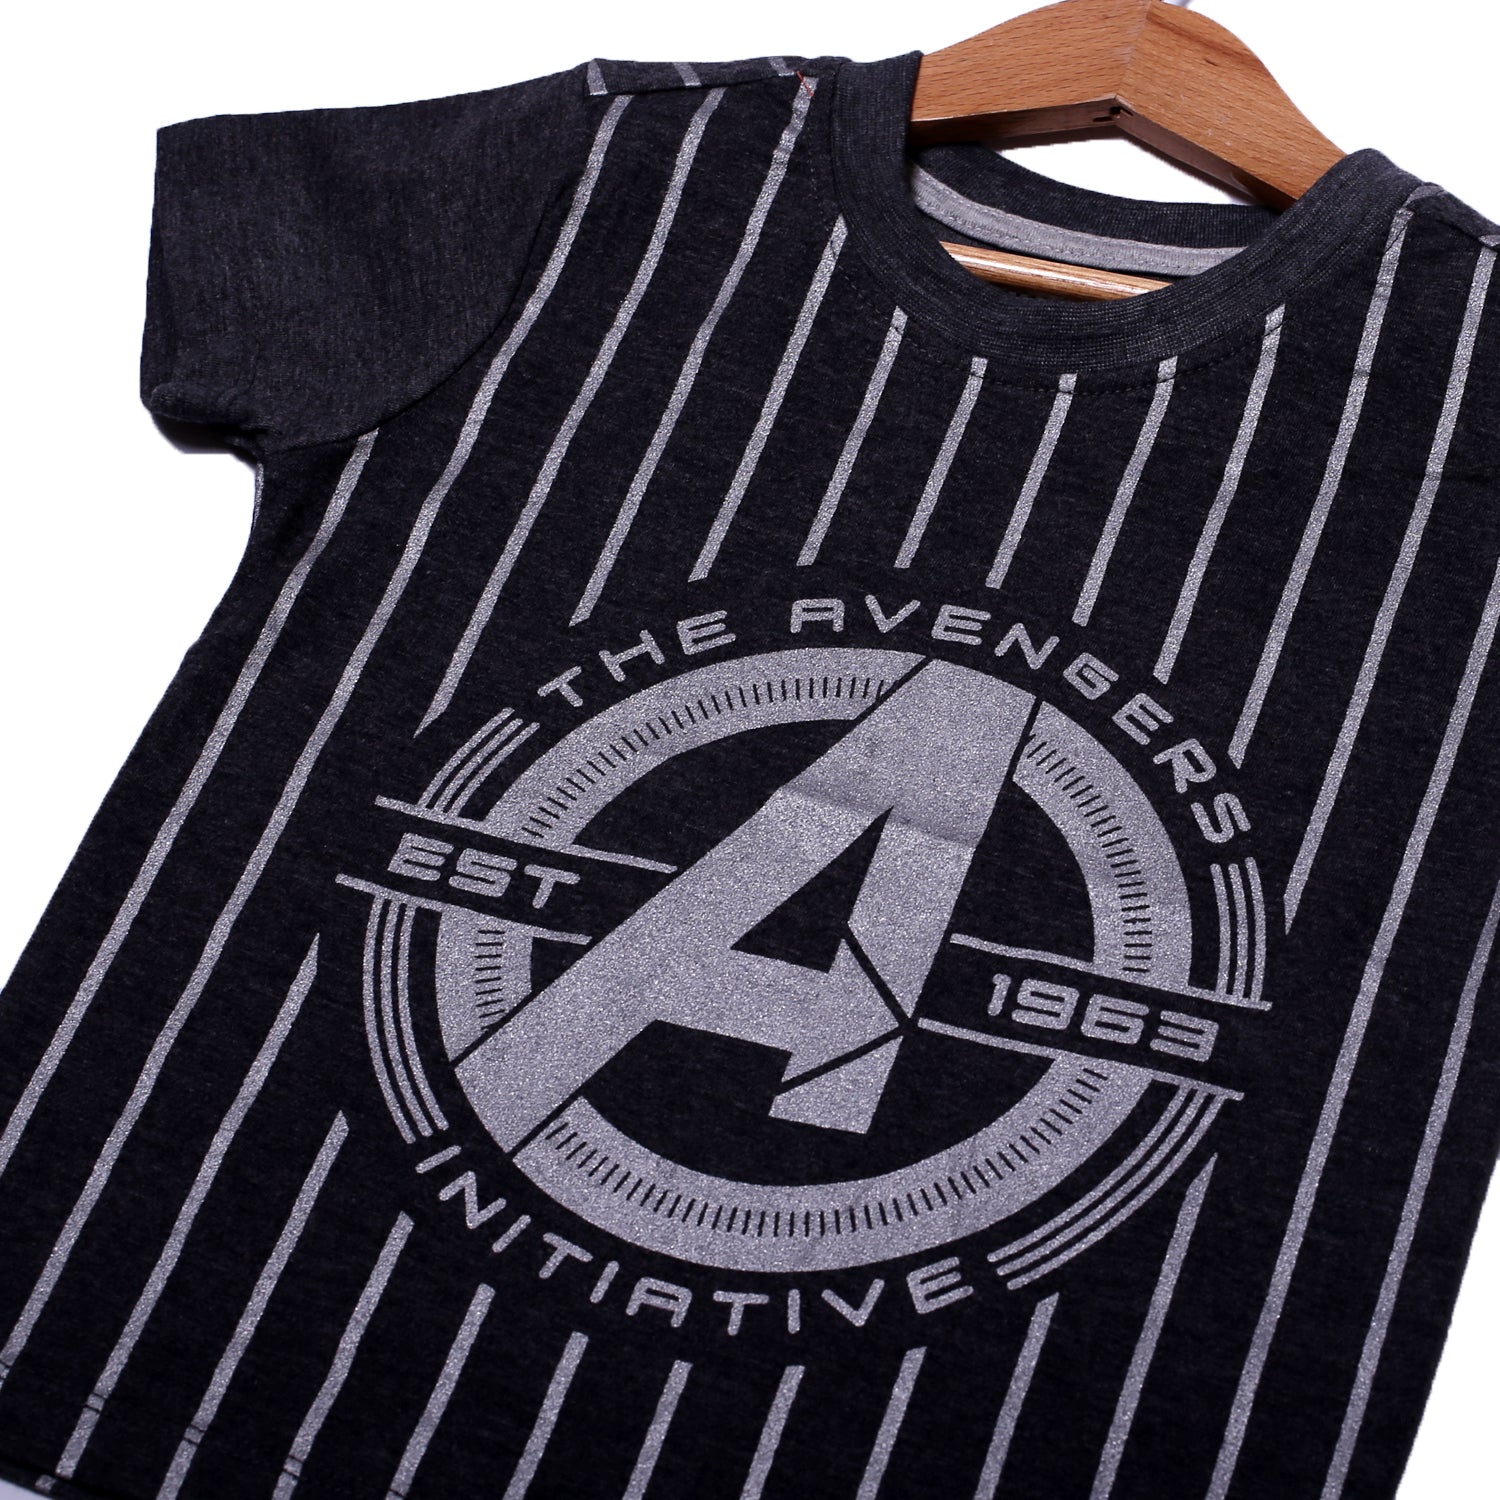 NEW CHARCOAL GREY THE AVENGERS PRINTED HALF SLEEVES T-SHIRT